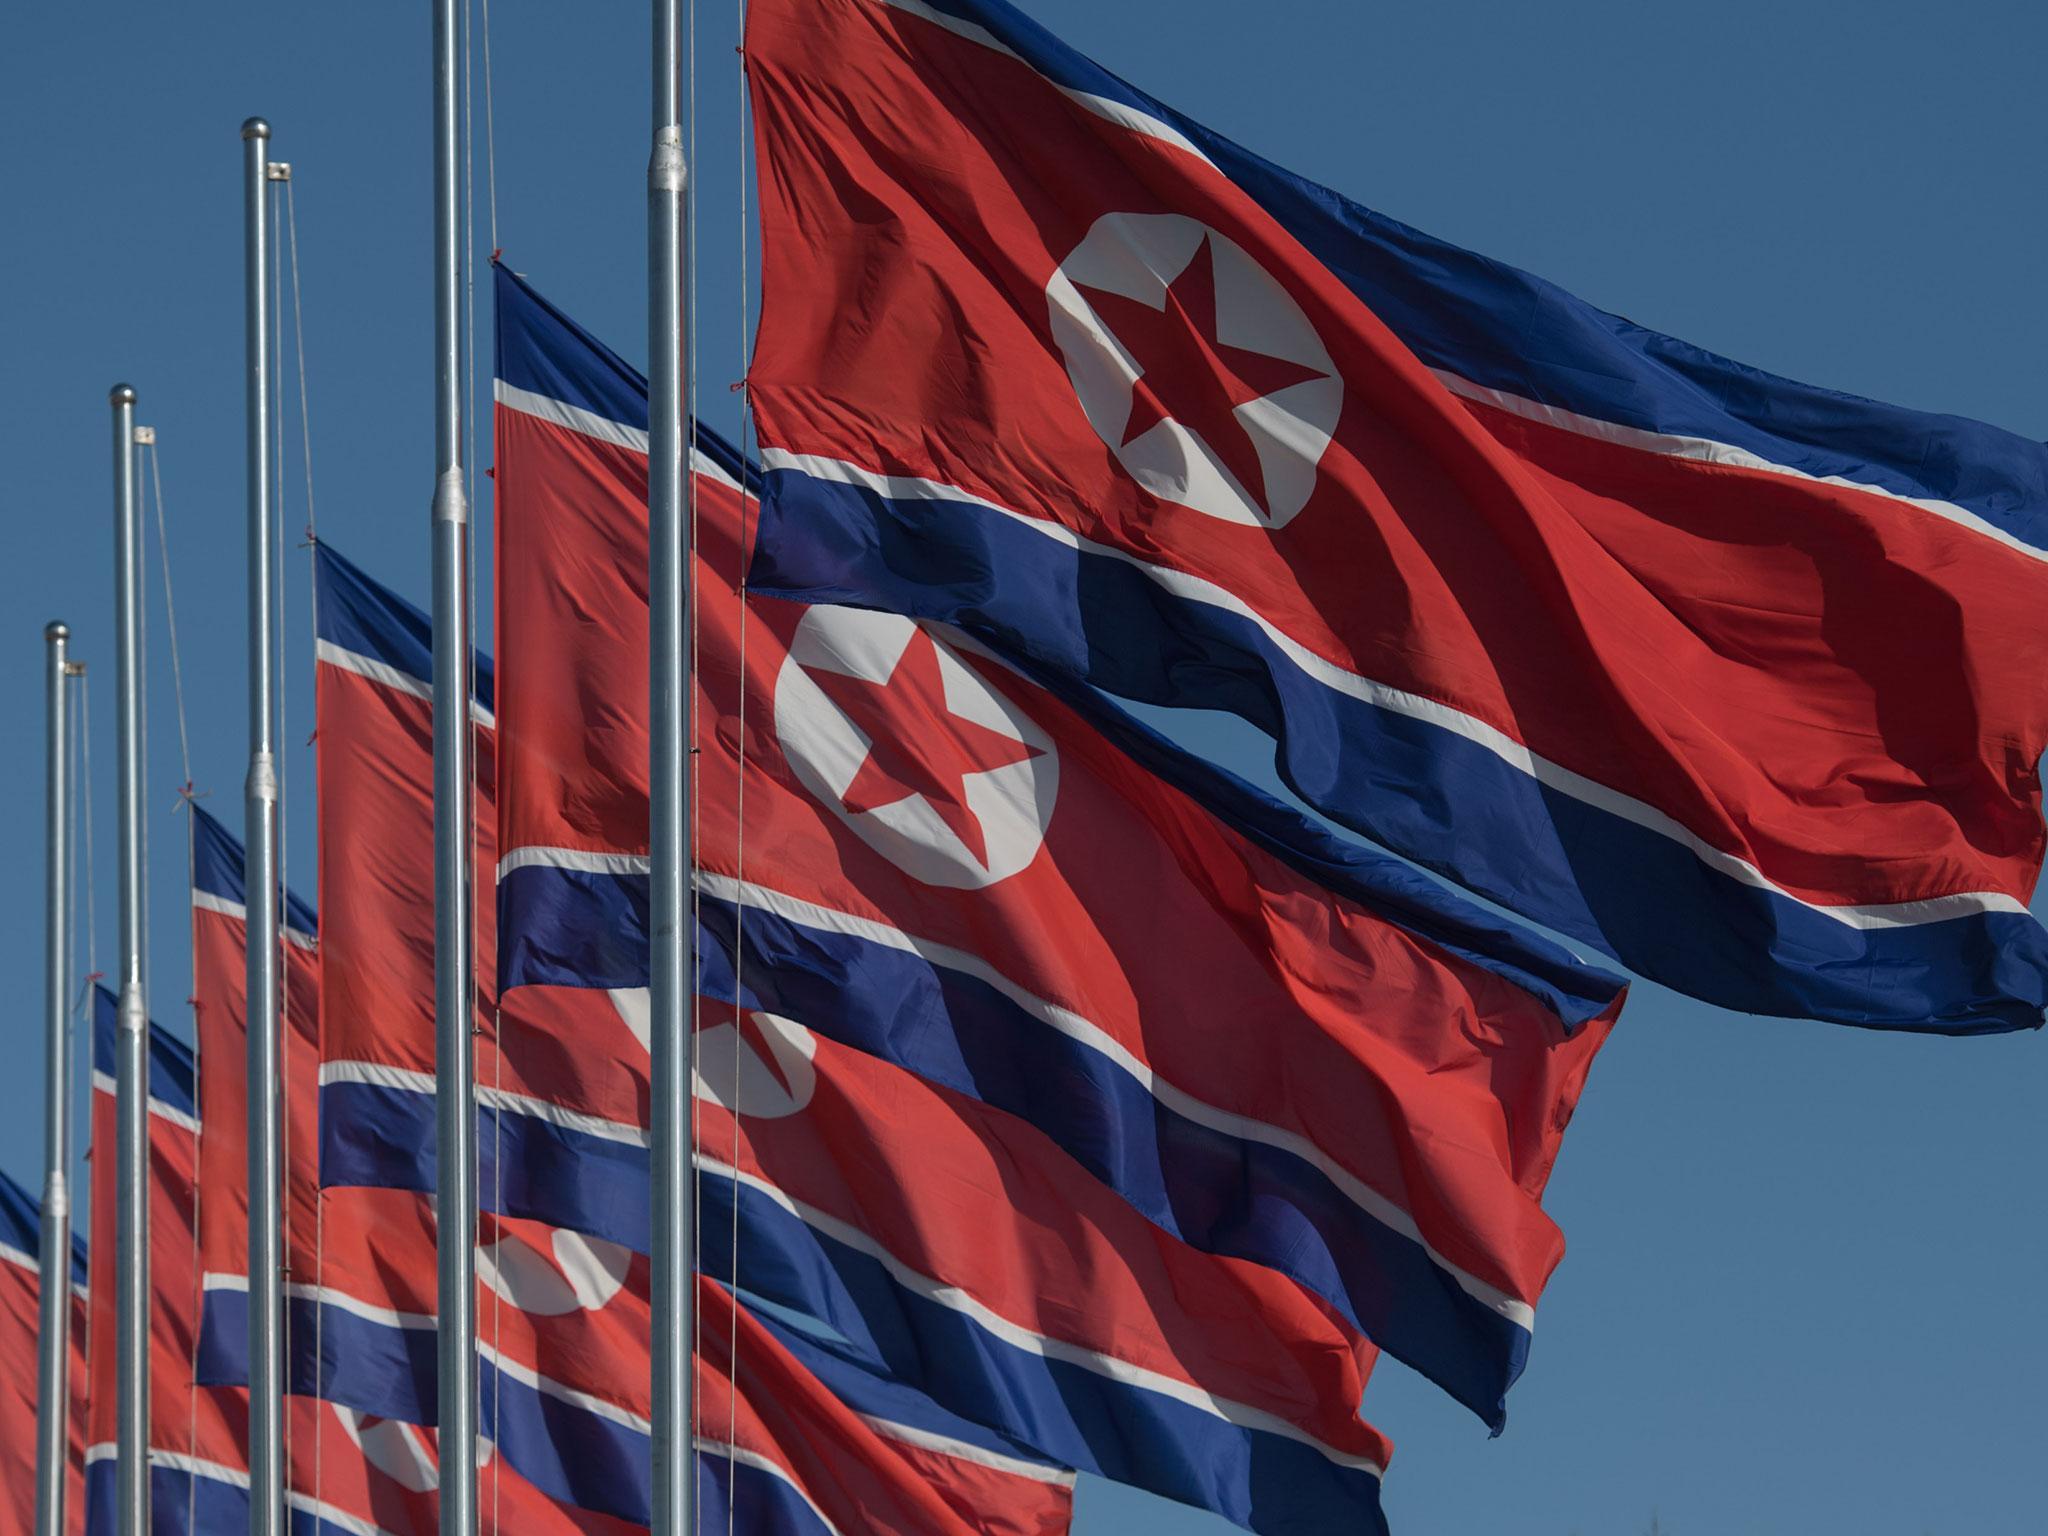 North Korean flags fly at half-mast Monday in solidarity with Cuba